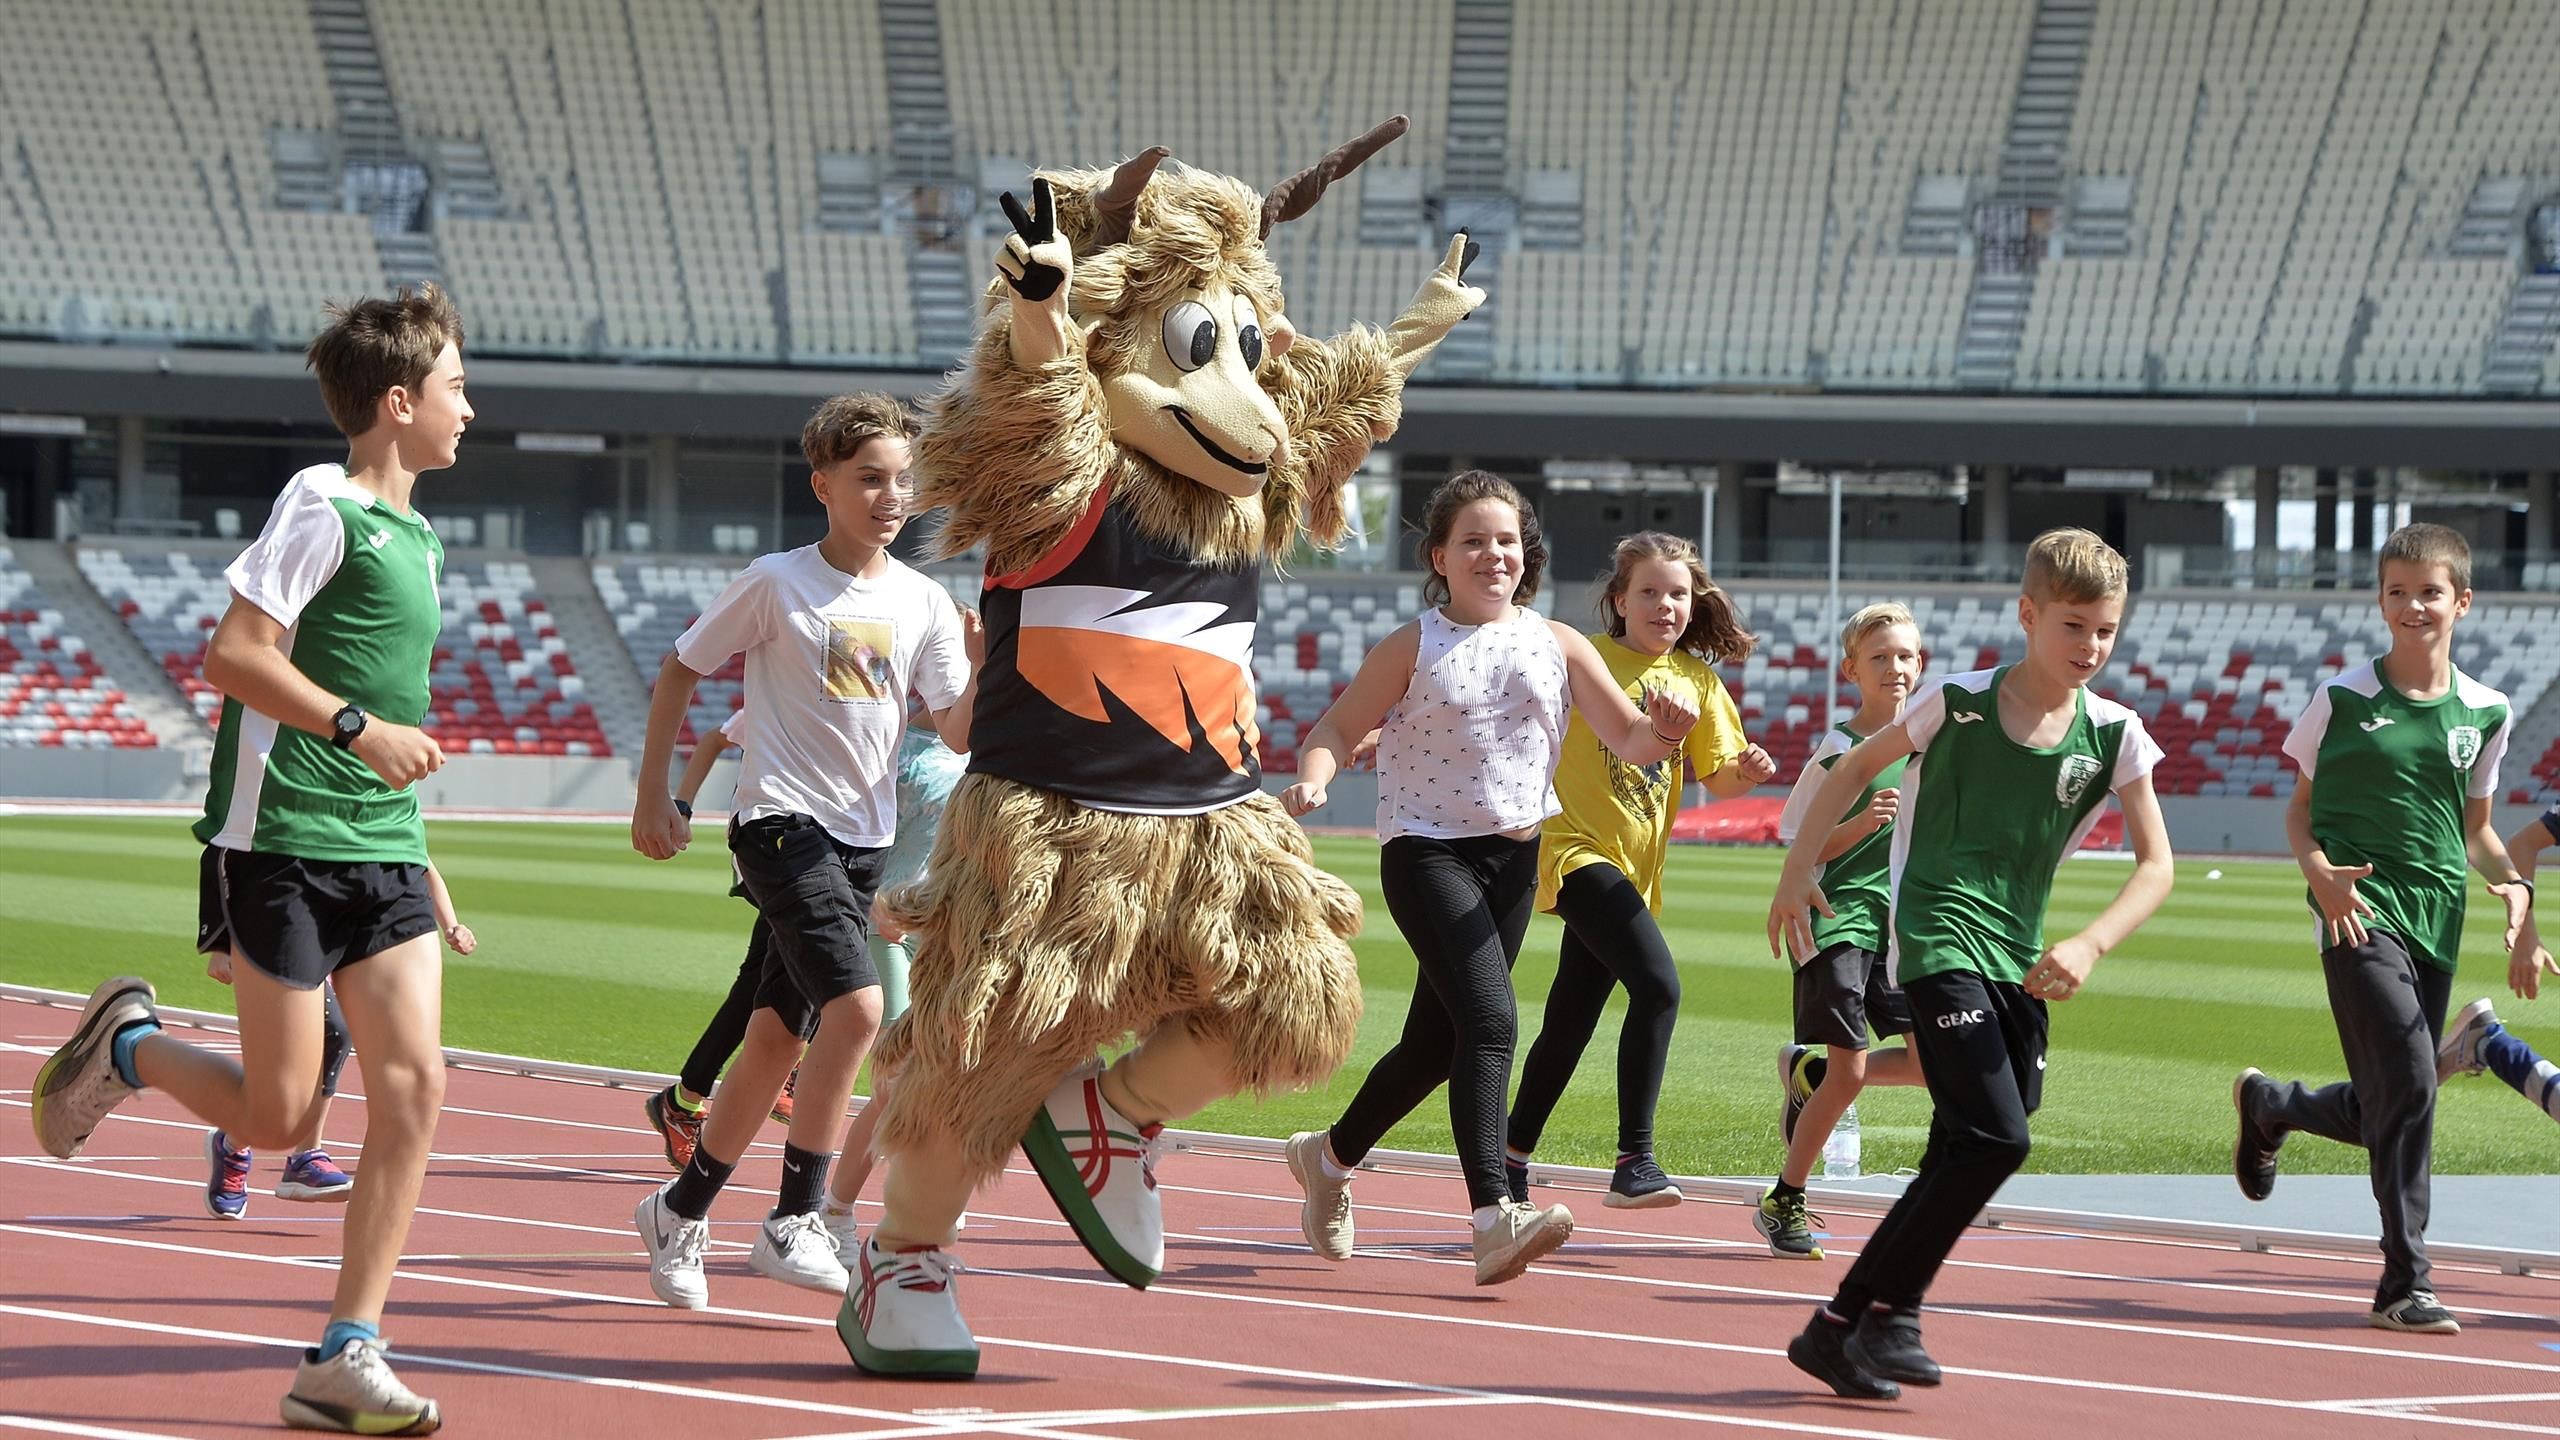 A mascot that looks really happy – the official sheep of the World Athletics Championships has been introduced